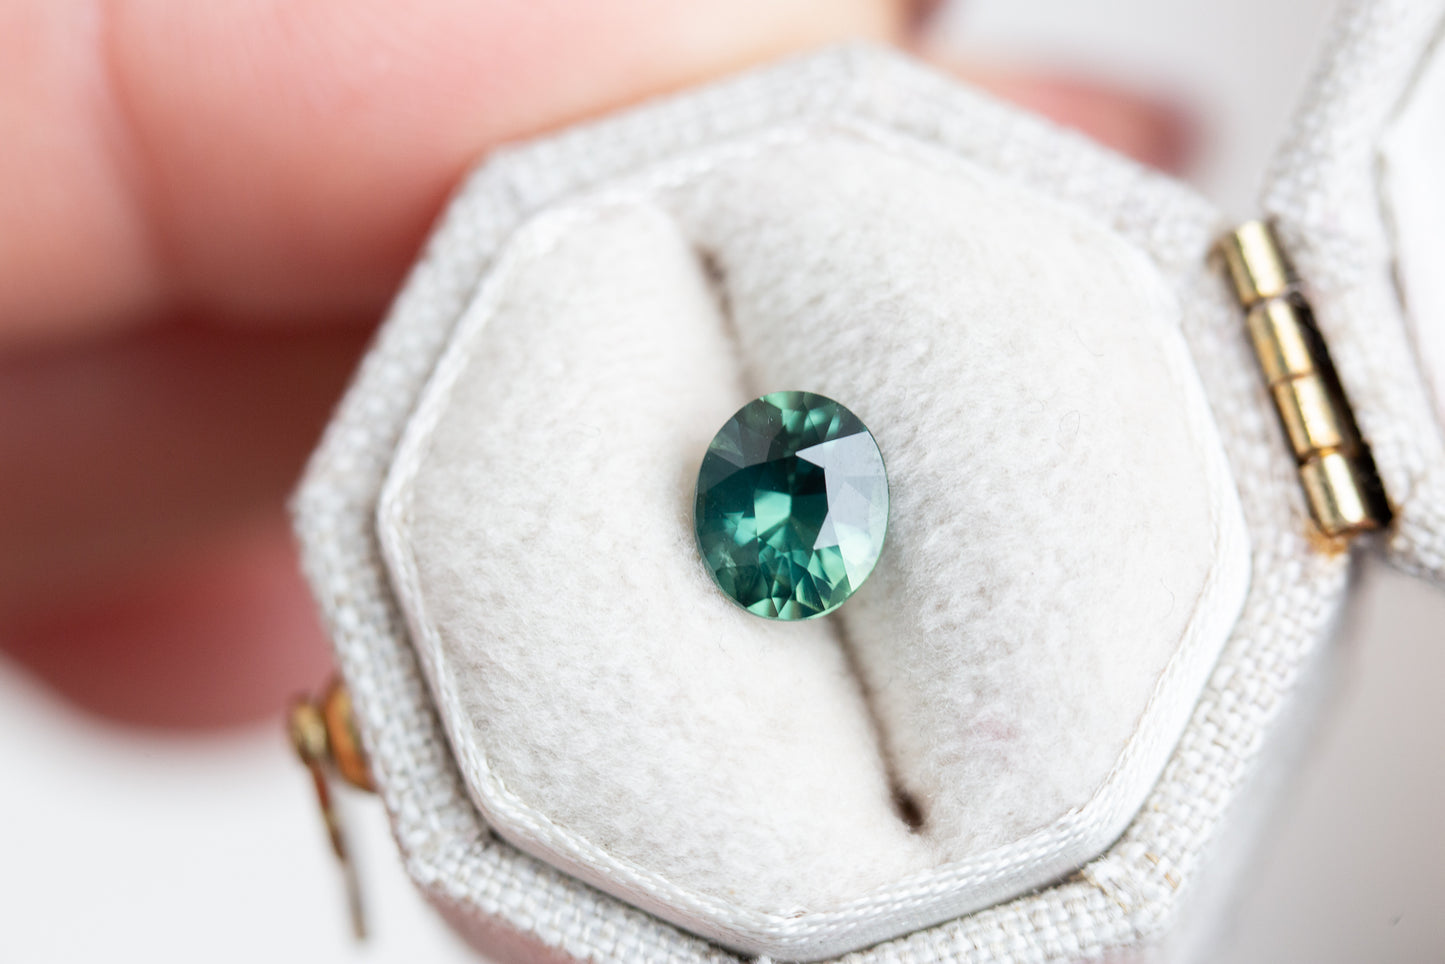 Load image into Gallery viewer, 1.24ct oval deep teal green sapphire
